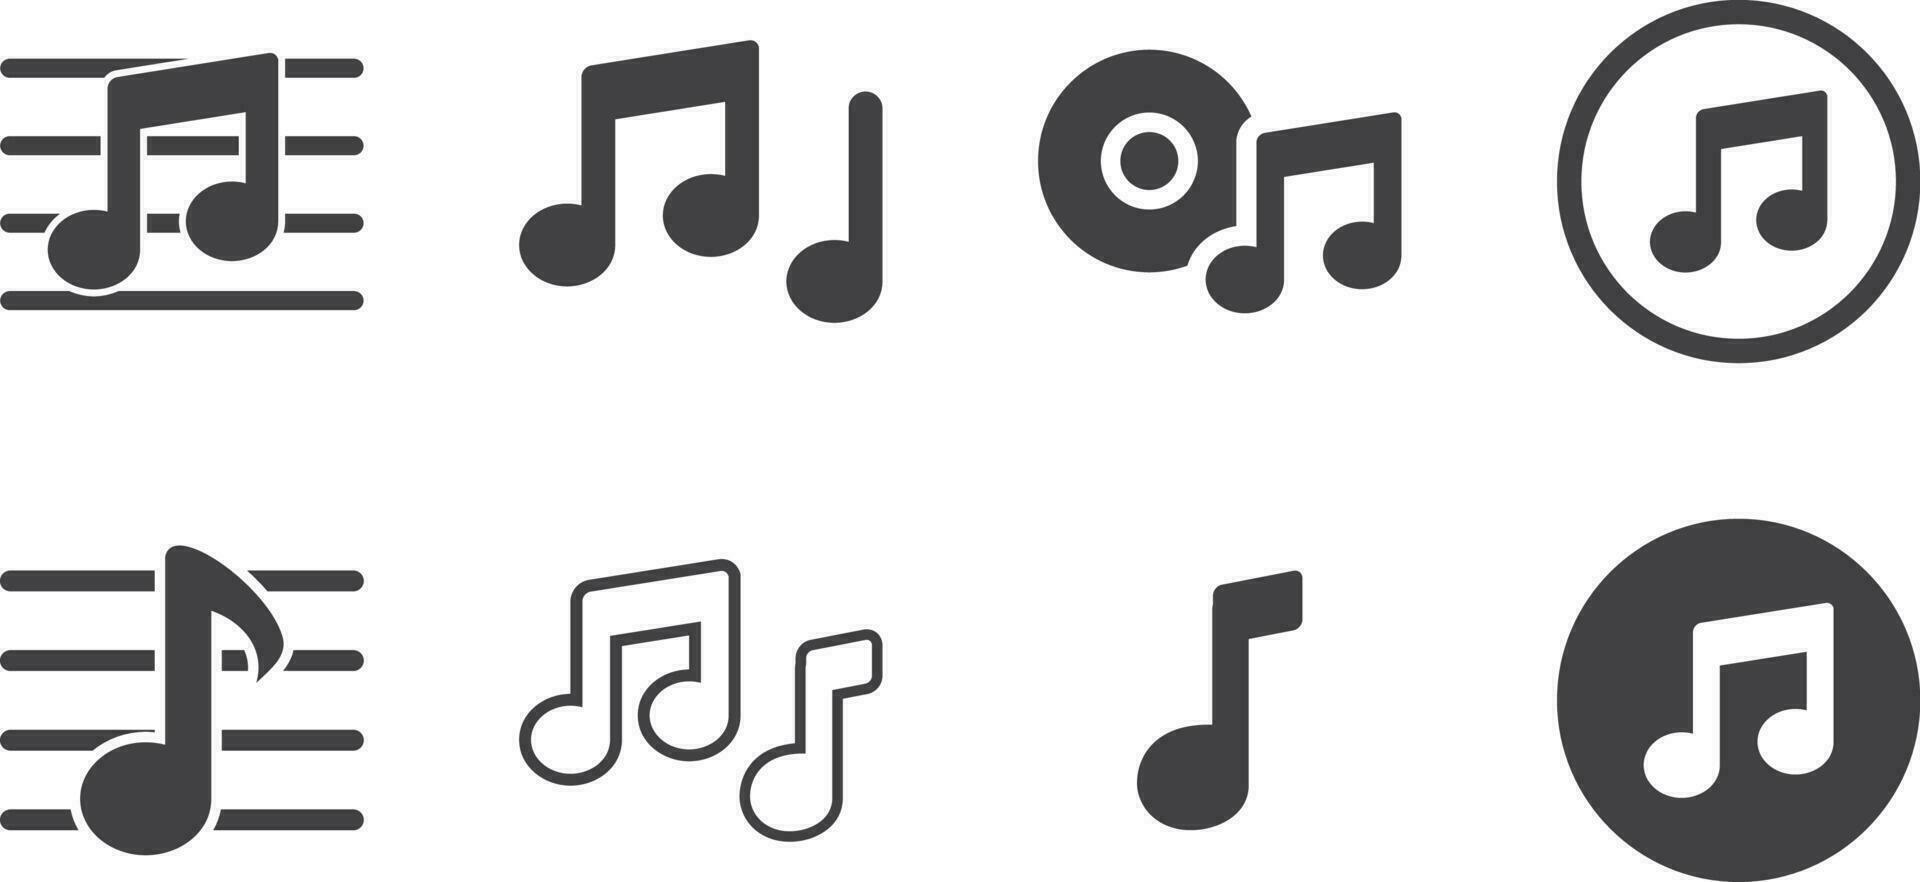 Music note icon vector illustration isolated on white background